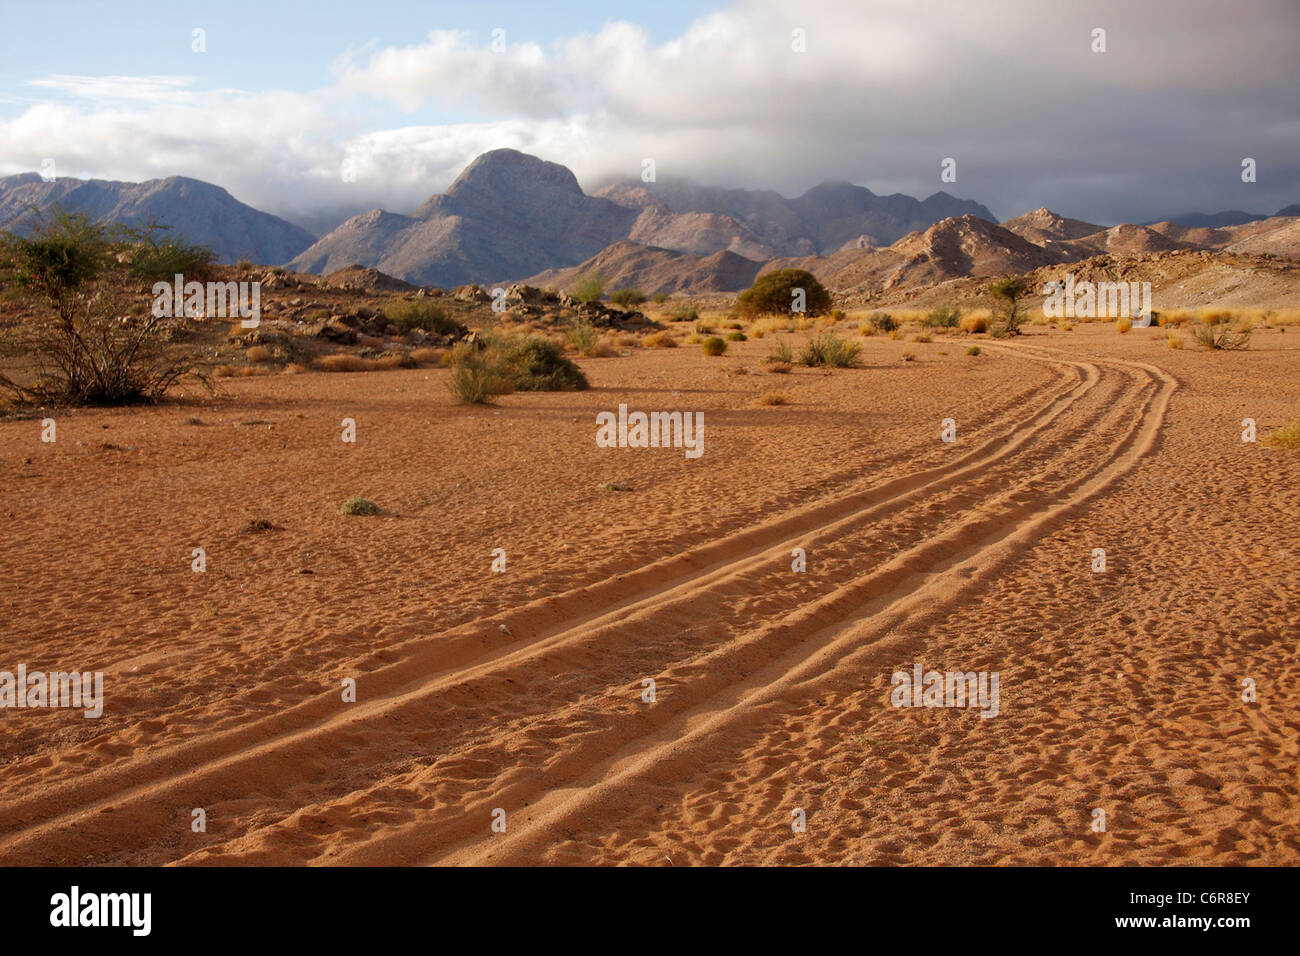 Semi-desert landscape with jeep tracks and Rosuintjieberg mountains in the distance. Stock Photo